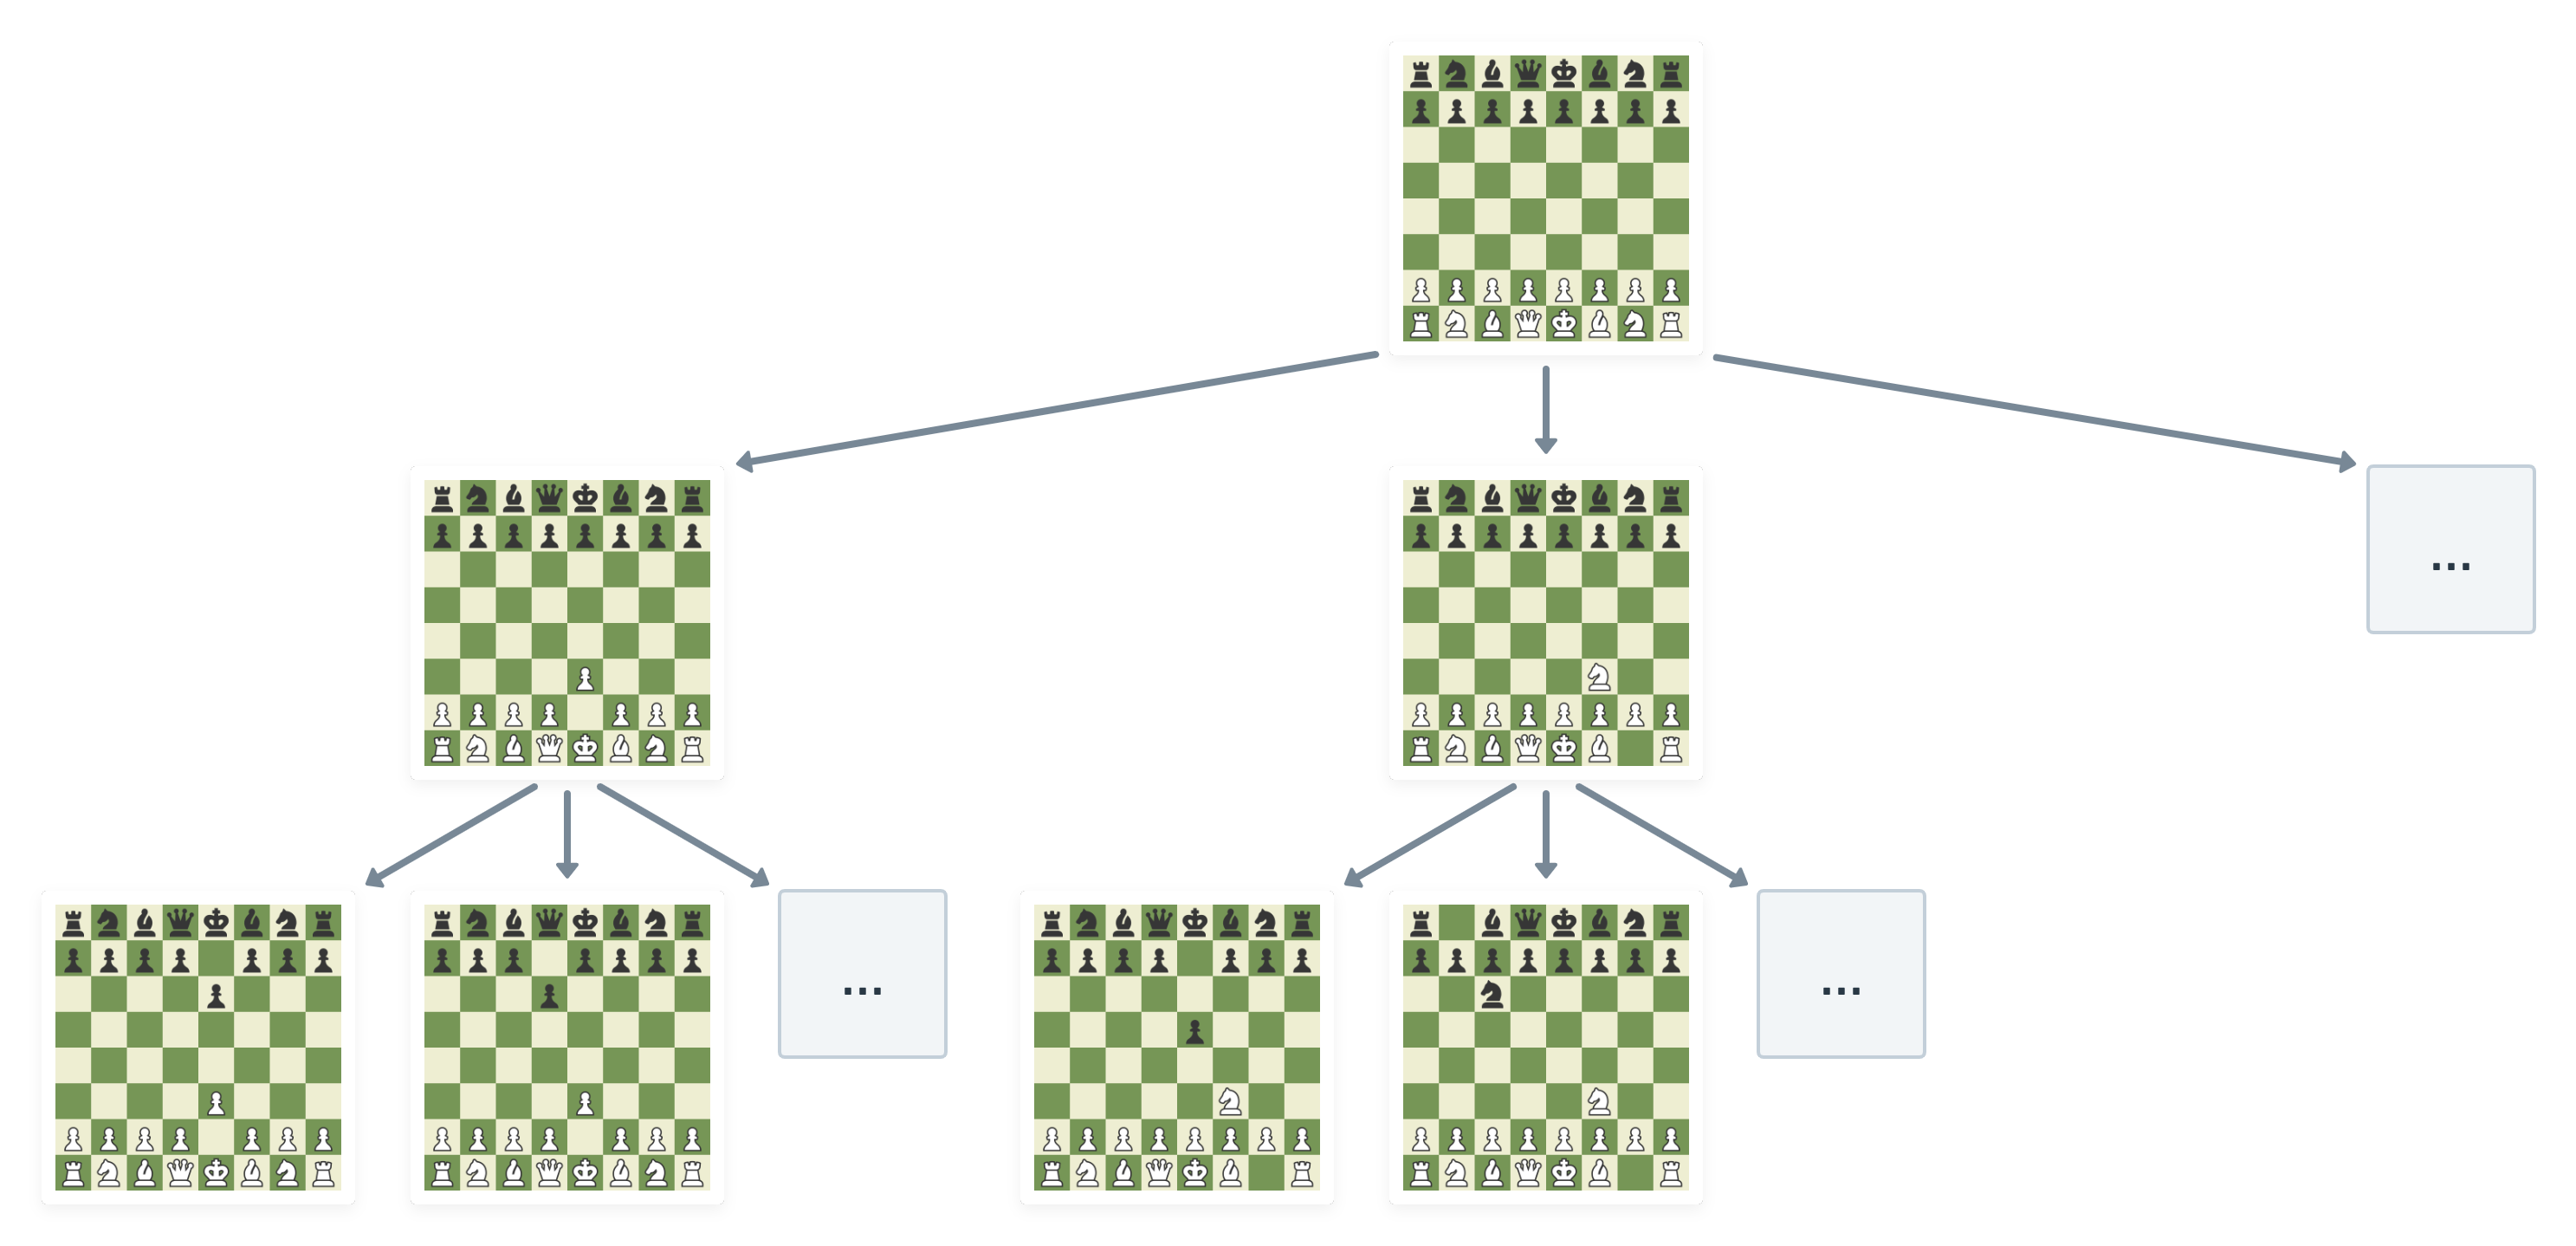 A simplified tree of chess moves.